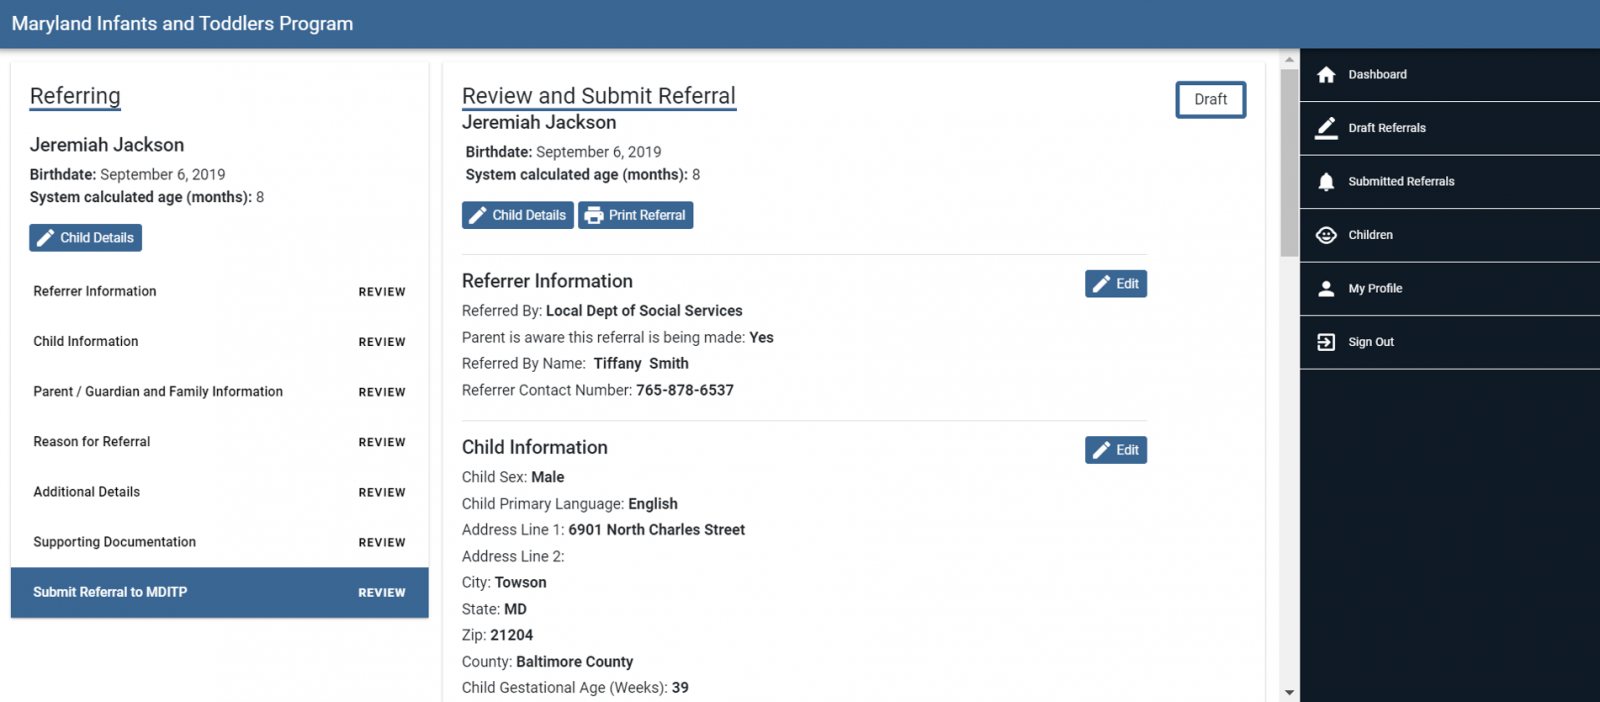 Referring screen shot where details of referral to be submitted are displayed